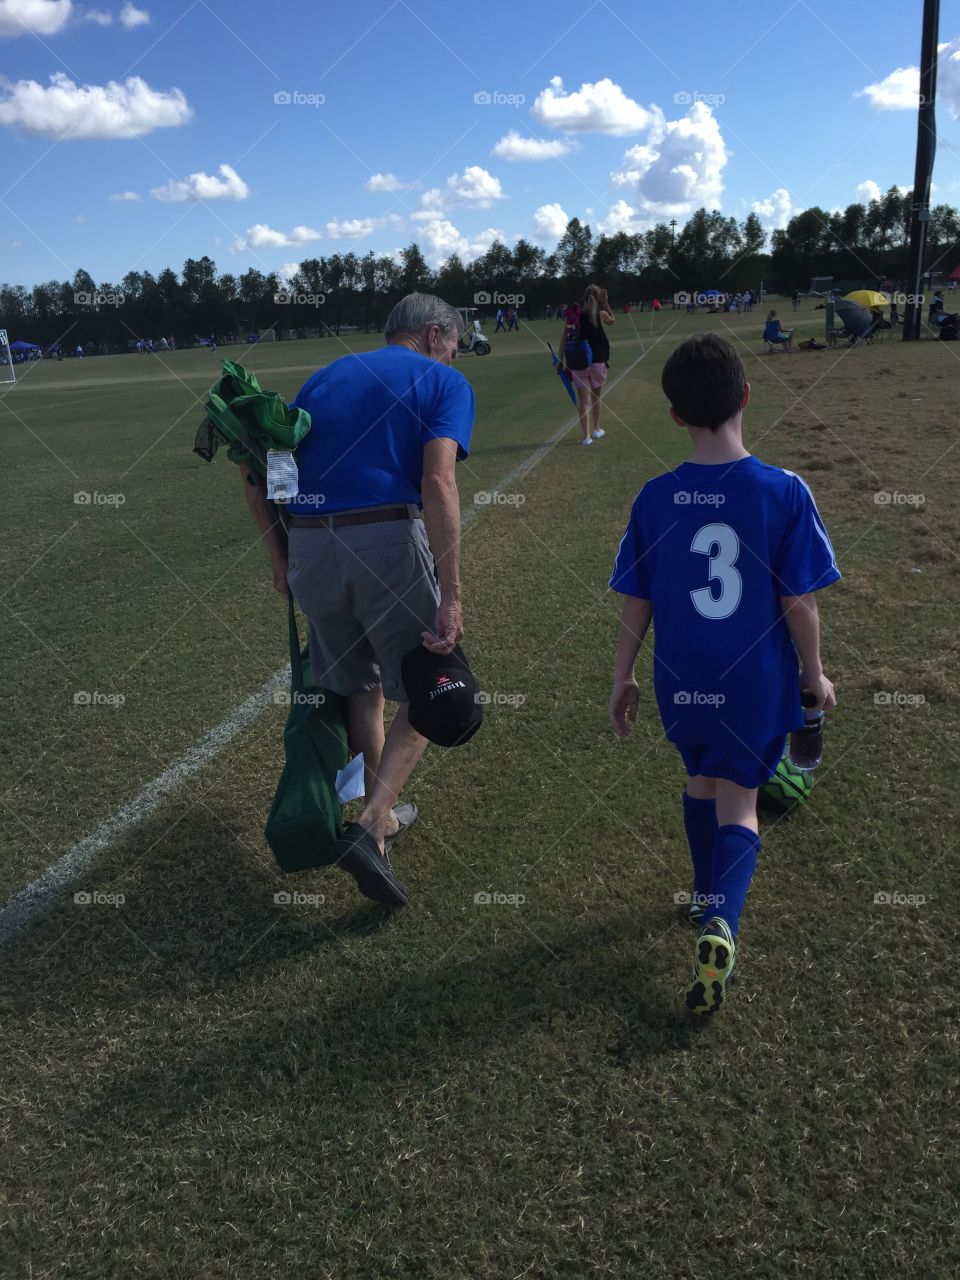 Grandfather carrying soccer gear with grandson walking off the soccer field together on a fall day.